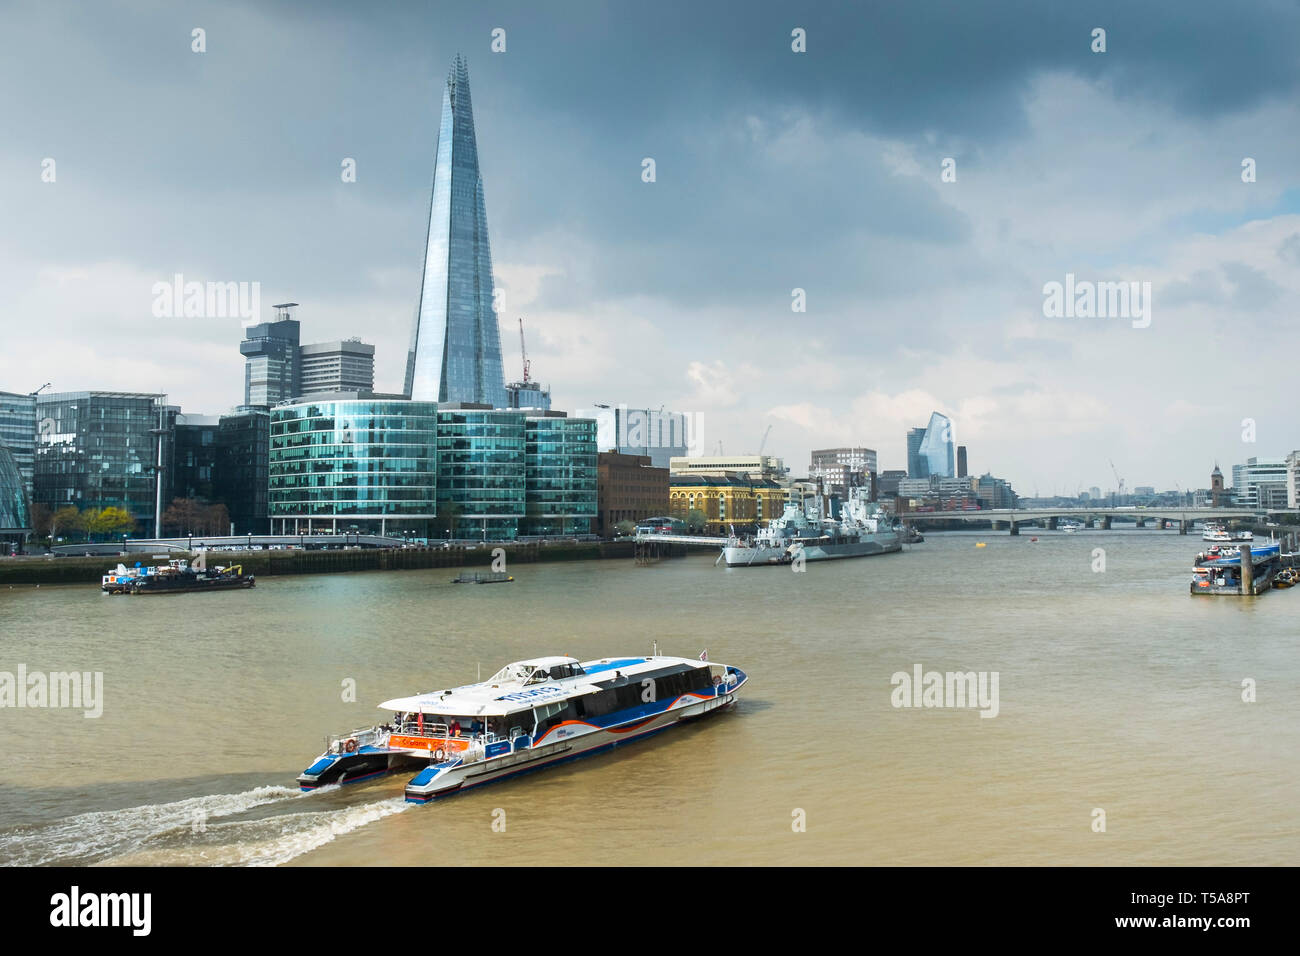 A Thames Clipper river boat on the River Thames with The Shard and other iconic buildings in the background. Stock Photo